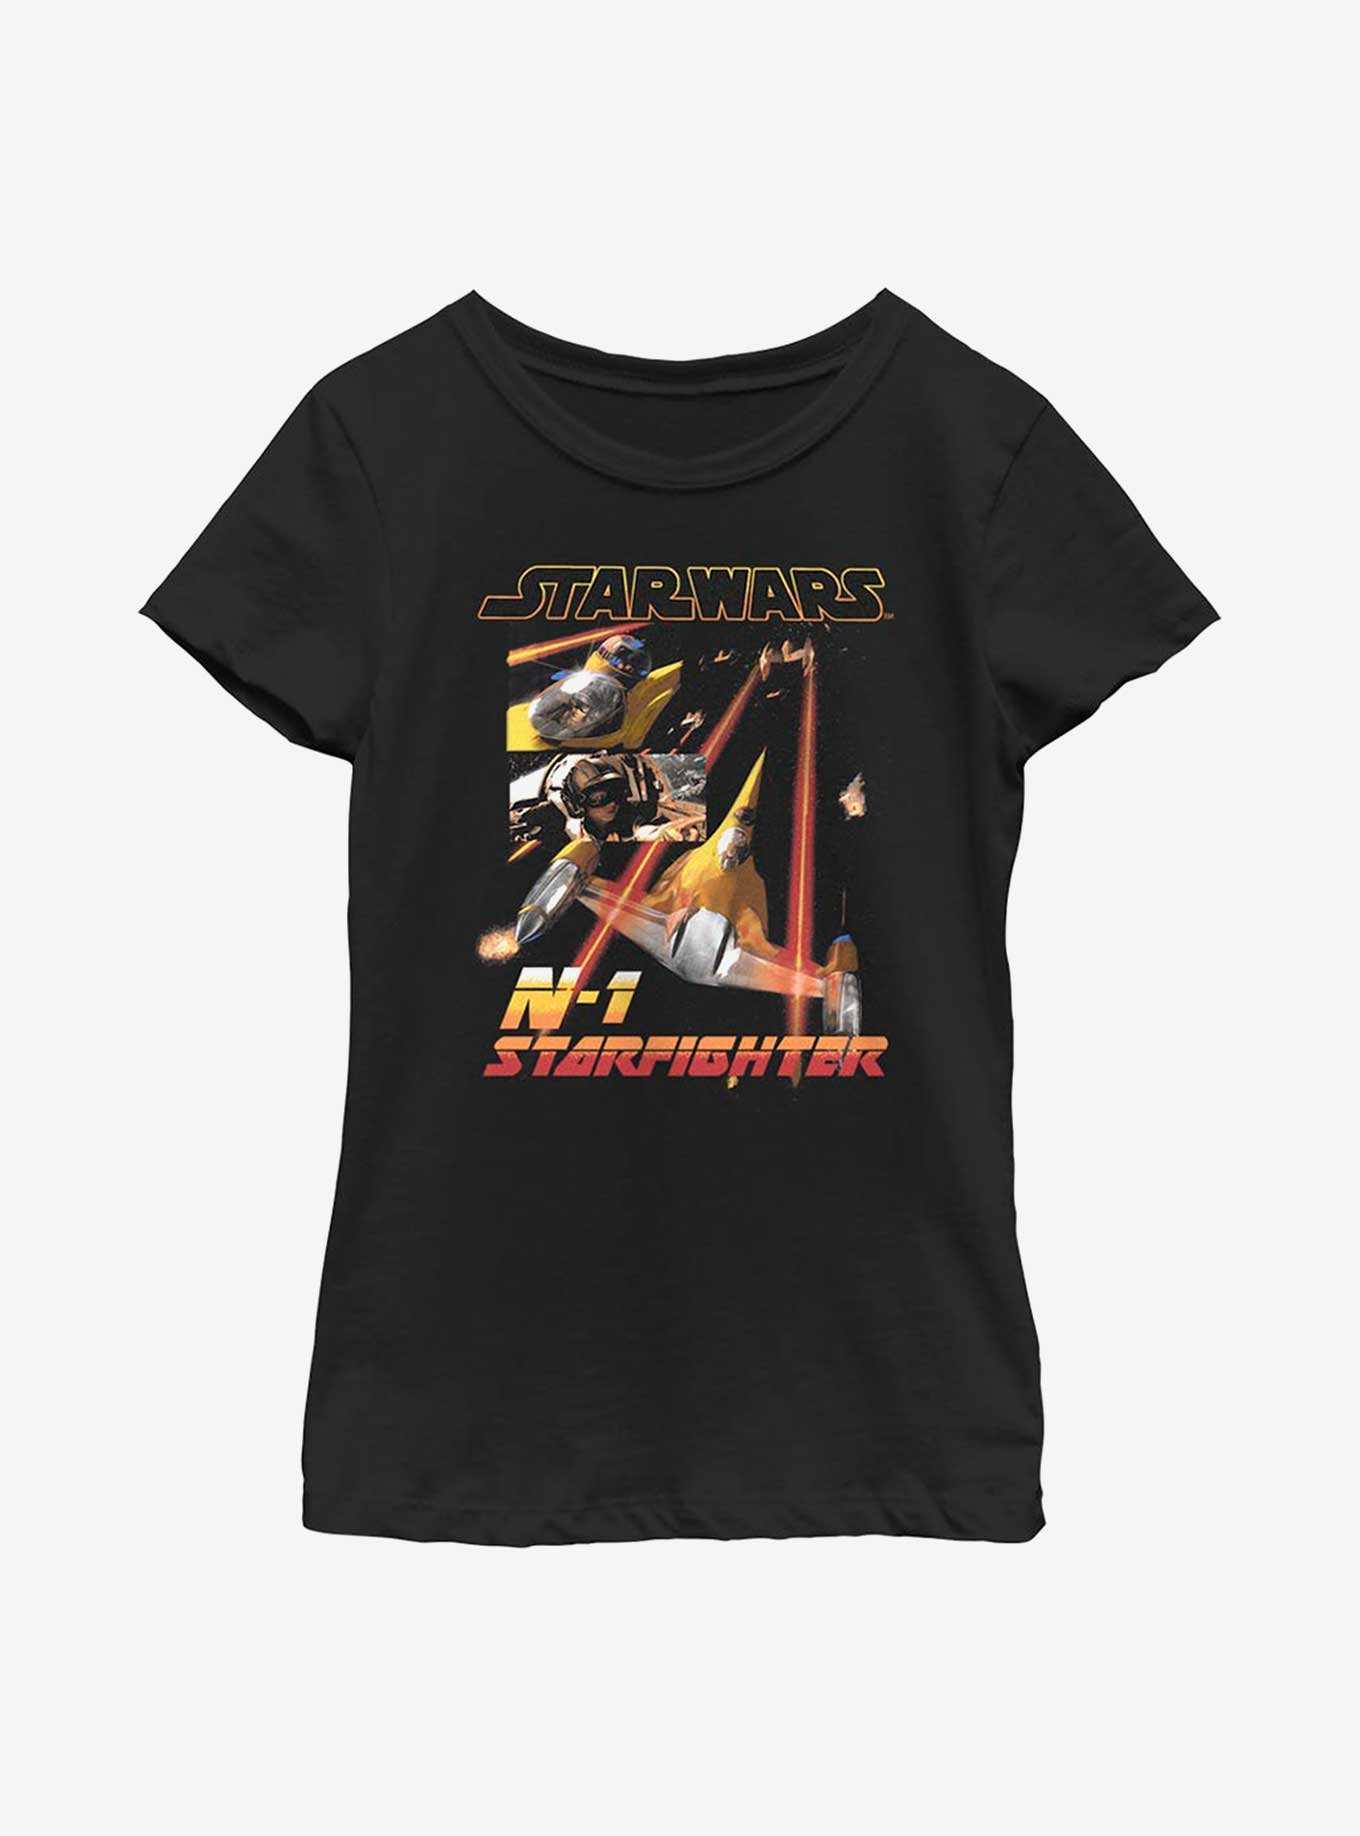 Star Wars The Book Of Boba Fett N-1 Starfighter Youth Girls T-Shirt, , hi-res